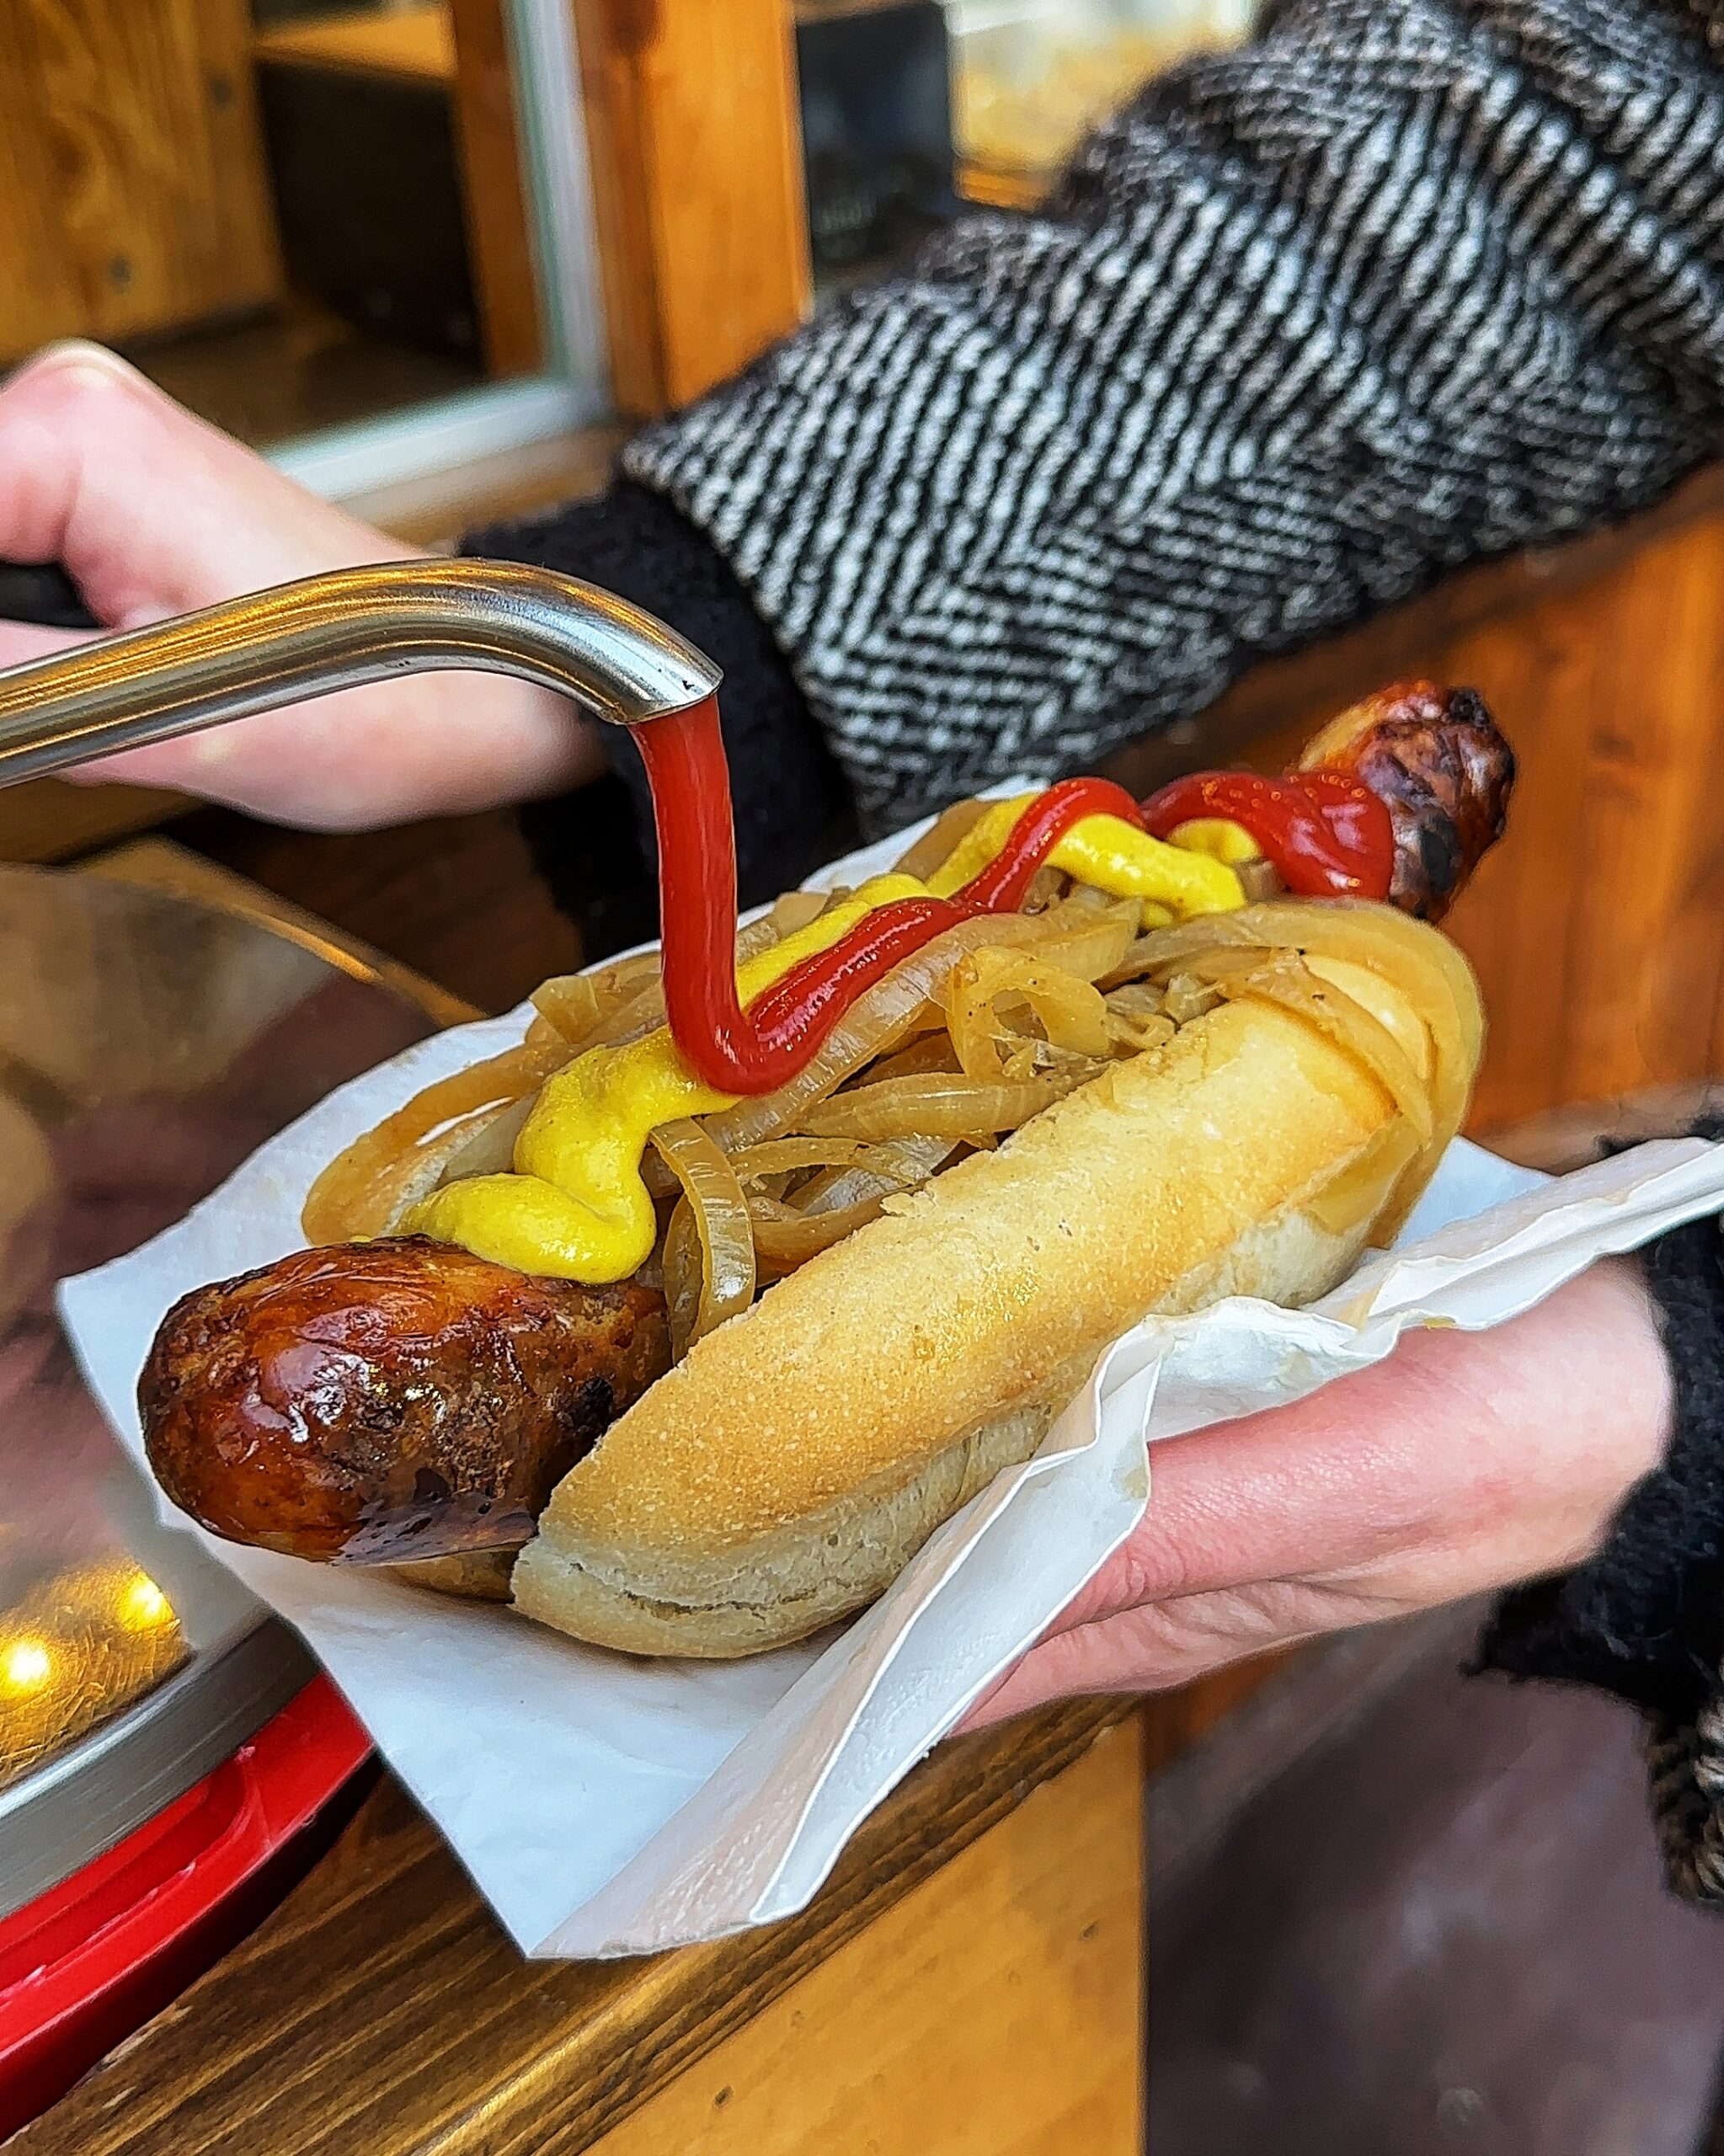 A classic bratwurst at the Manchester Christmas Markets.